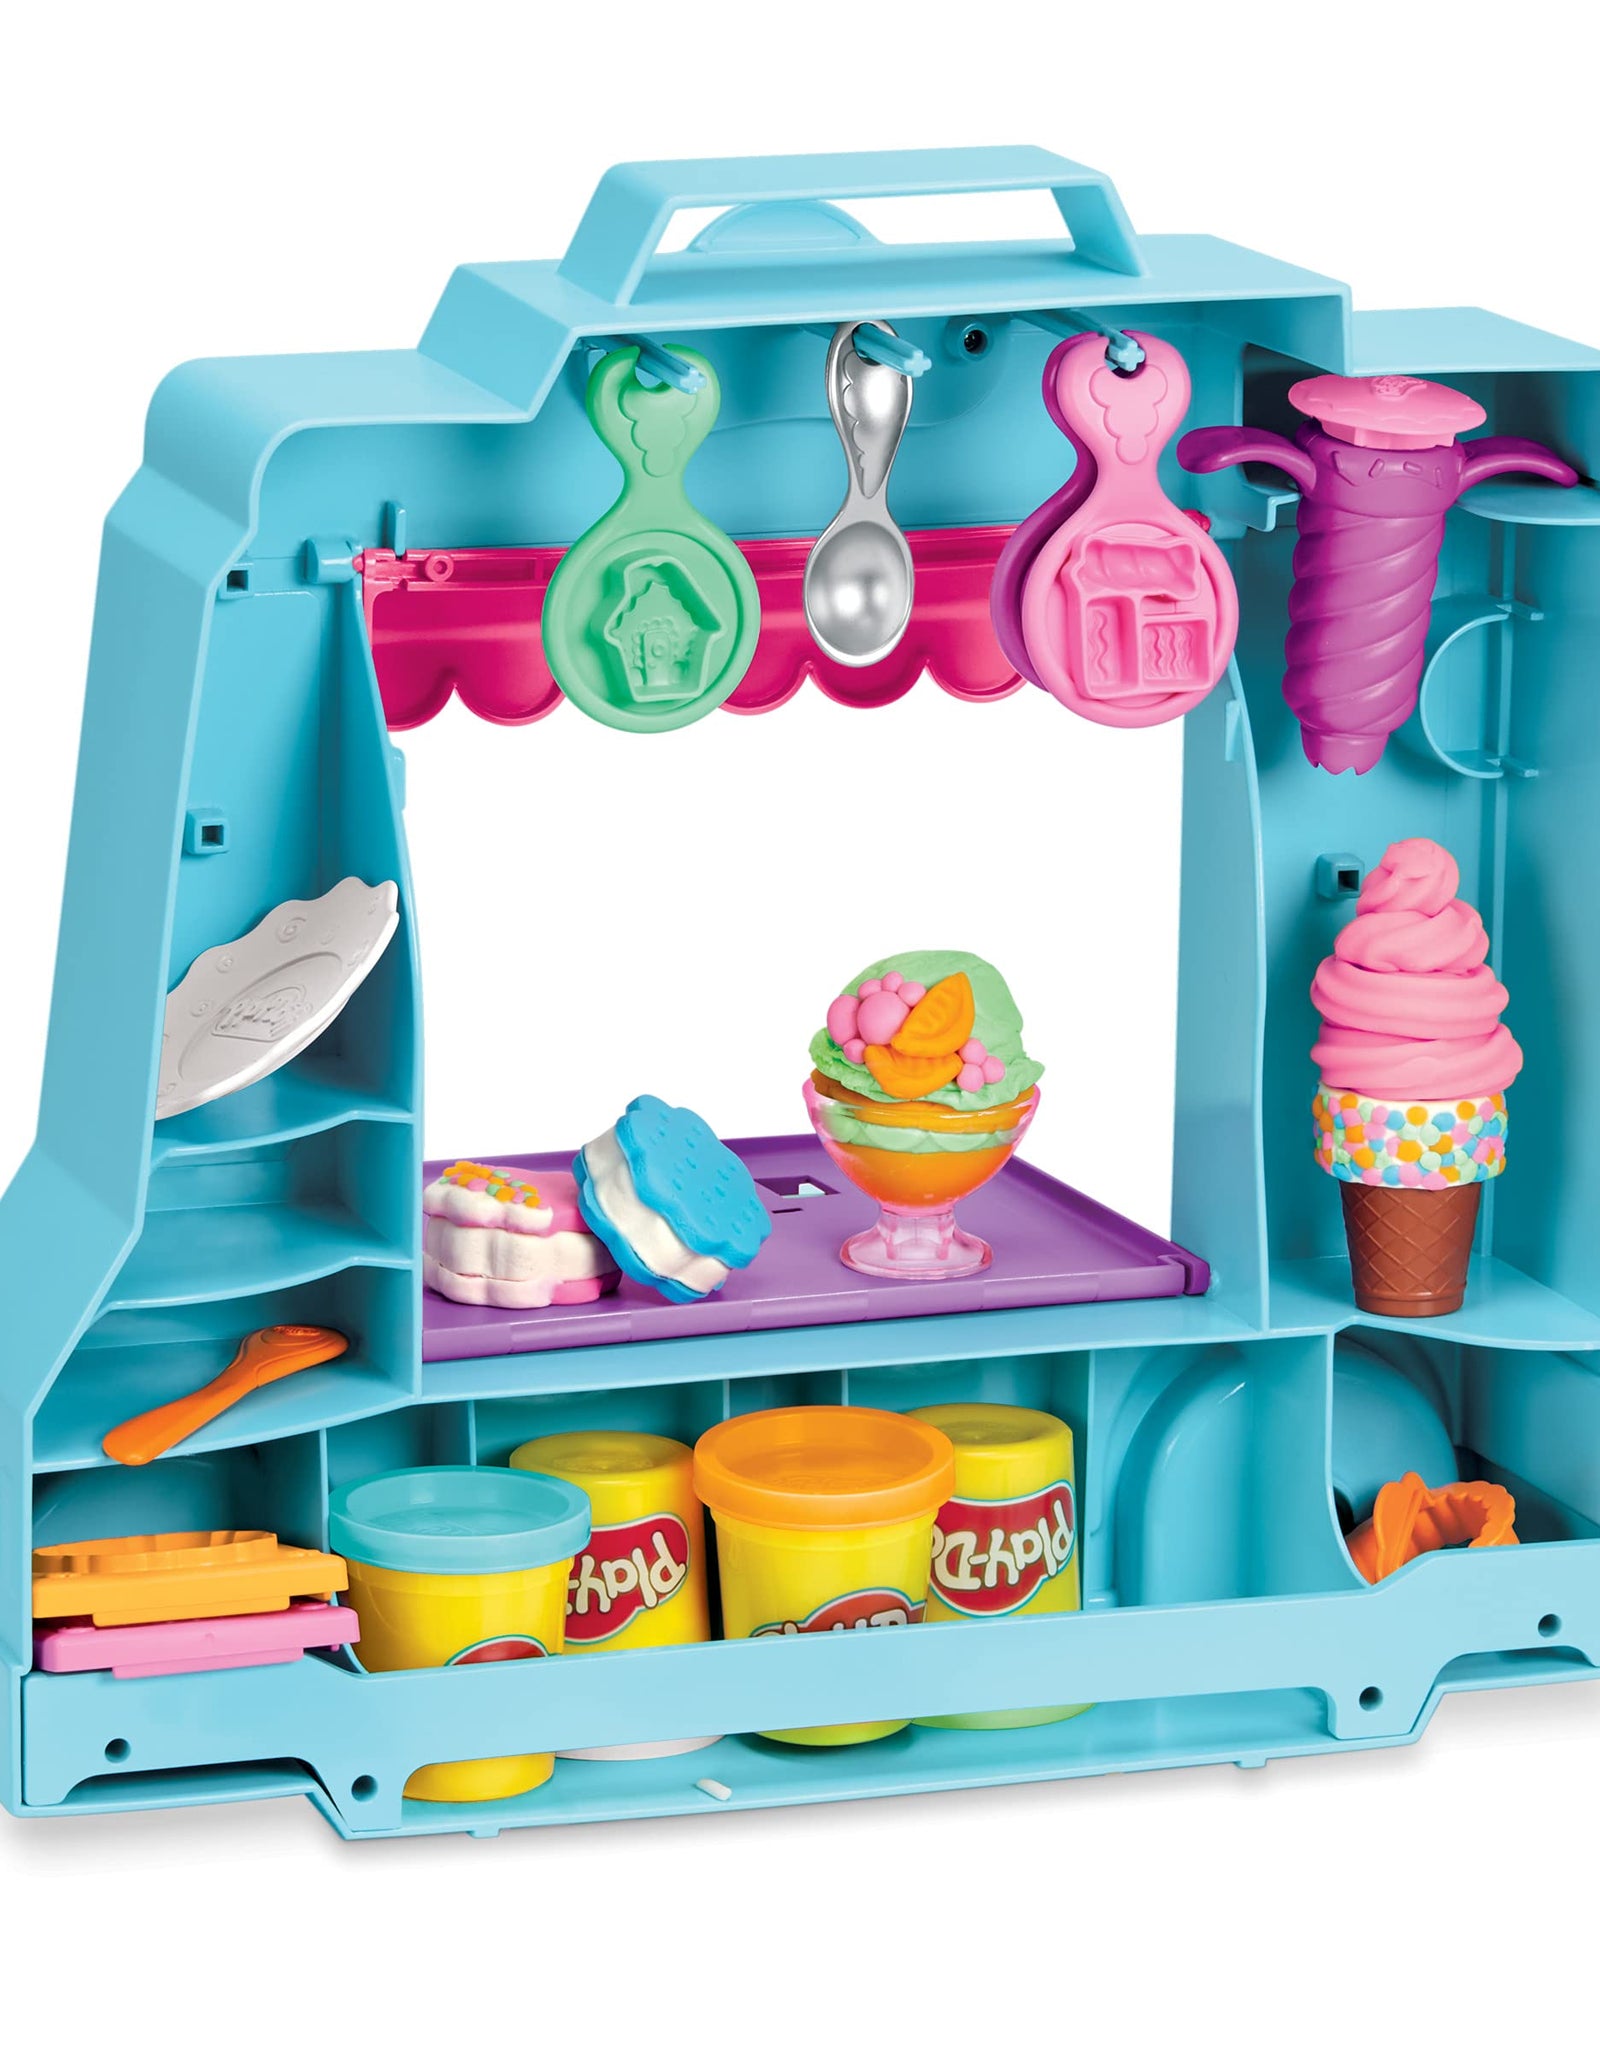 Play-Doh Ice Cream Truck Playset, Pretend Play Toy for Kids 3 Years and Up with 20 Tools, 5 Modeling Compound Colors, Over 250 Possible Combinations